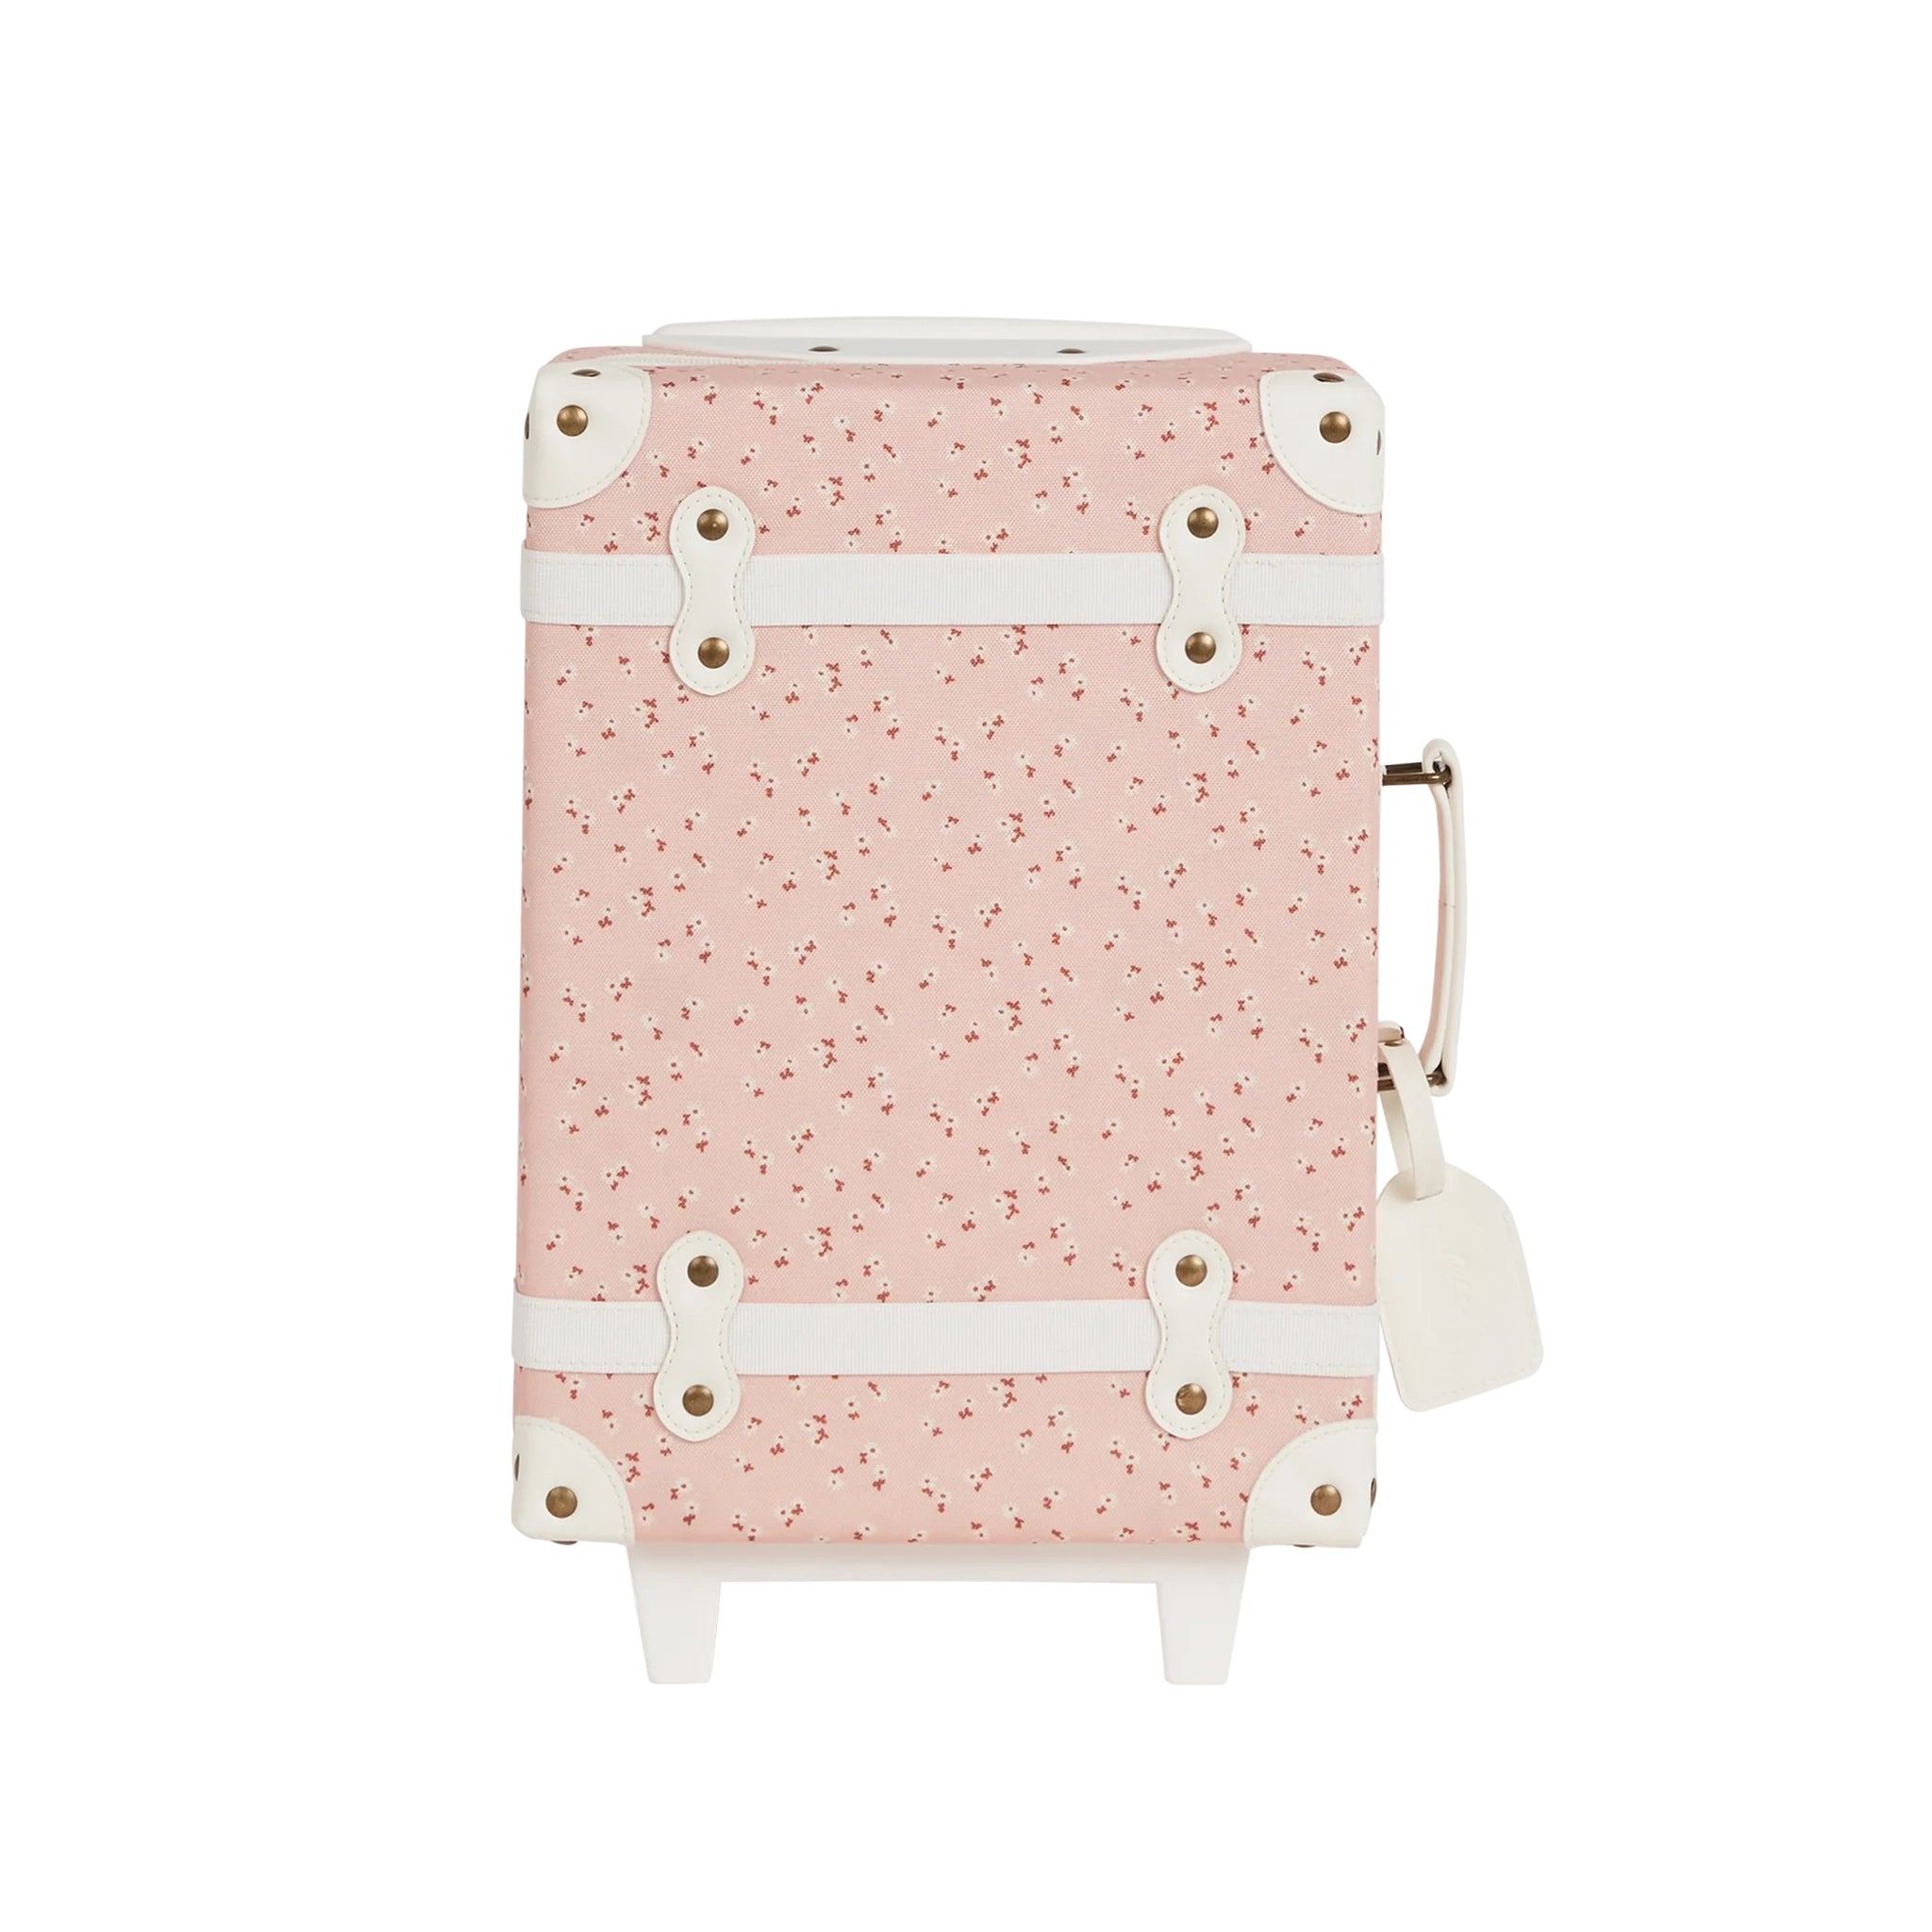 A pink floral print childrens roller suitcase with white details.